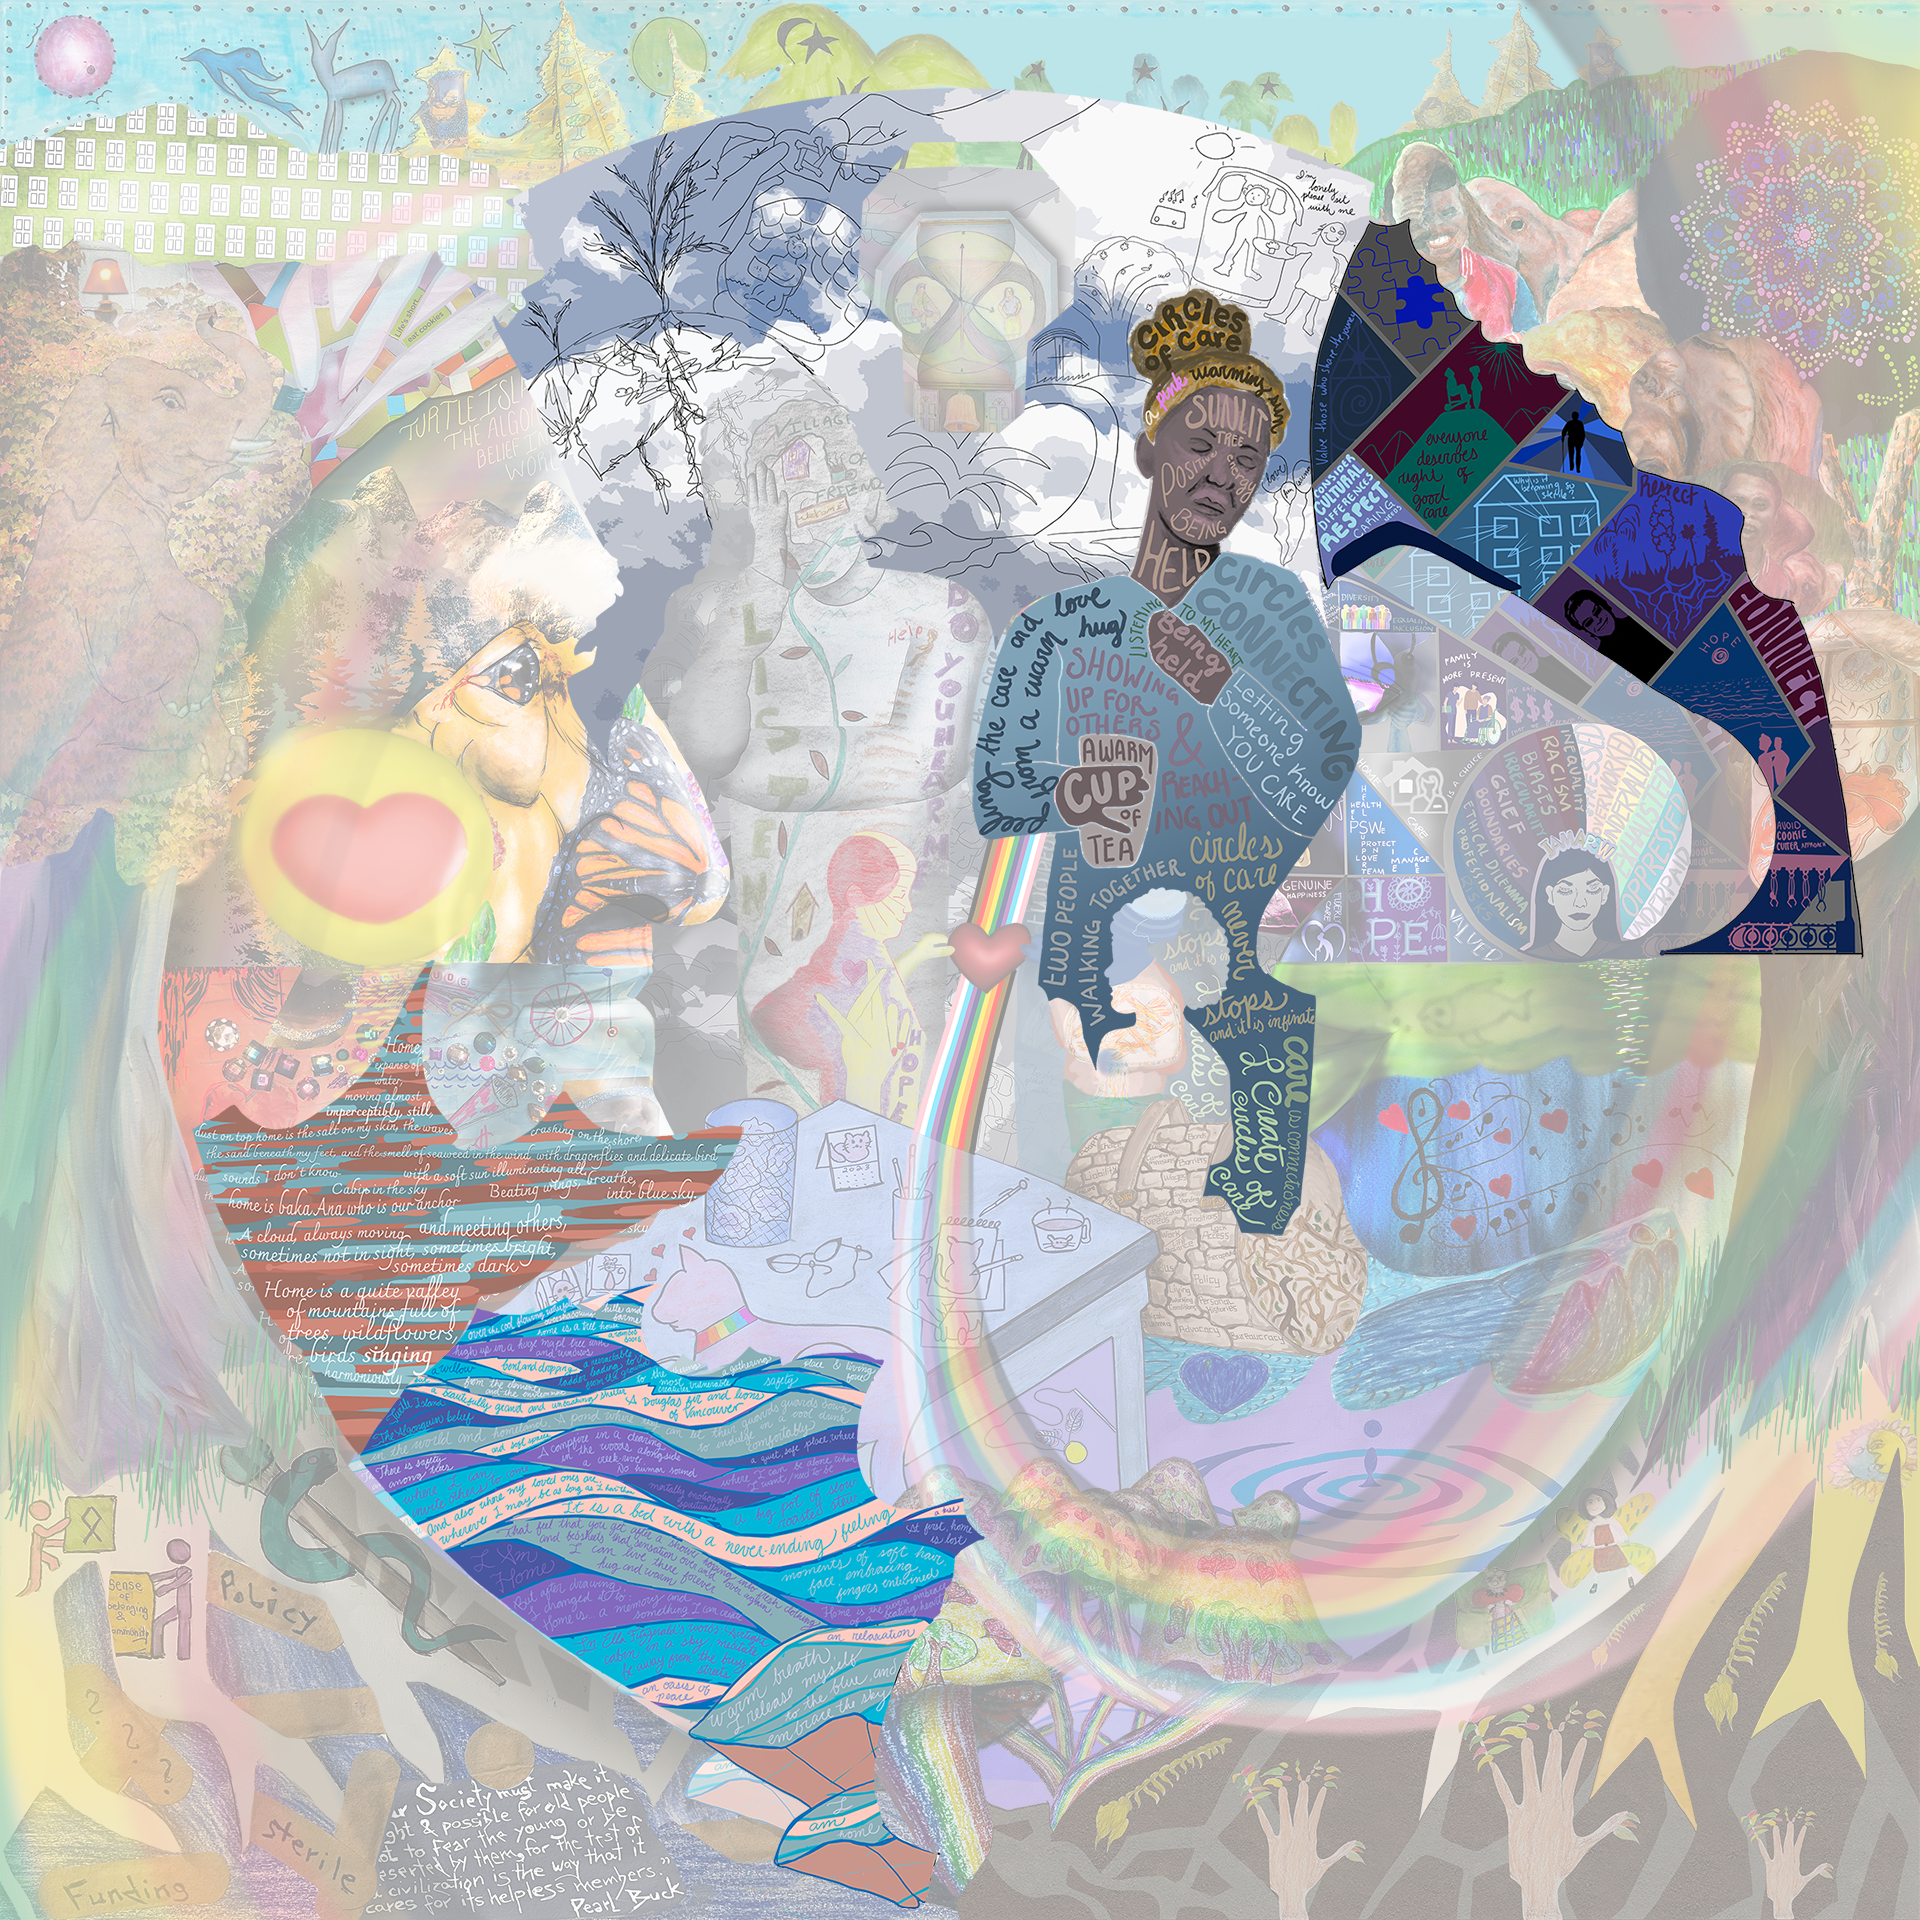 This layer depicts a personal support worker with one hand on their chest and another holding a mug of tea. Their eyes are closed, and emotive words are written on their hair, skin, clothing, and cup. To the right of the figure is a layer with segments of art with text and smaller images depicting different aspects of care.